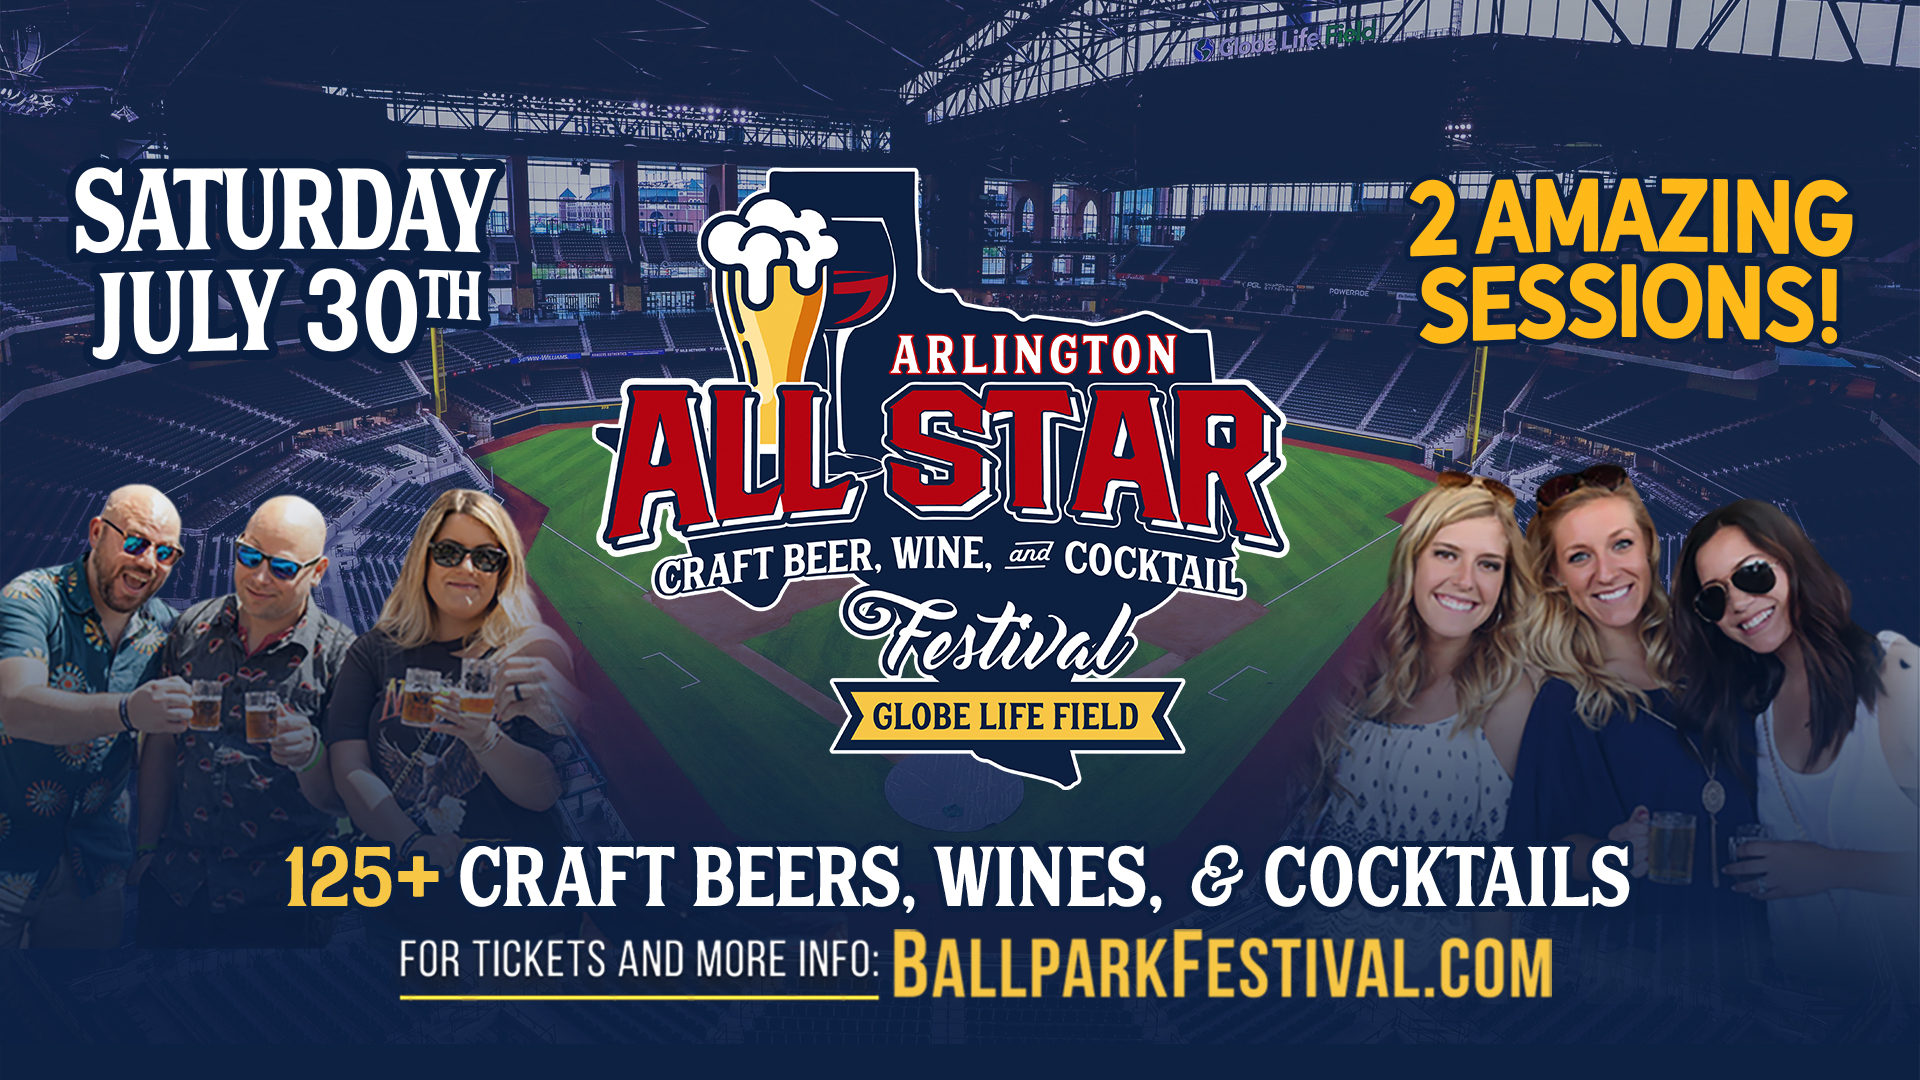 ARLINGTON ALL STAR CRAFT BEER, WINE AND COCKTAIL FESTIVAL